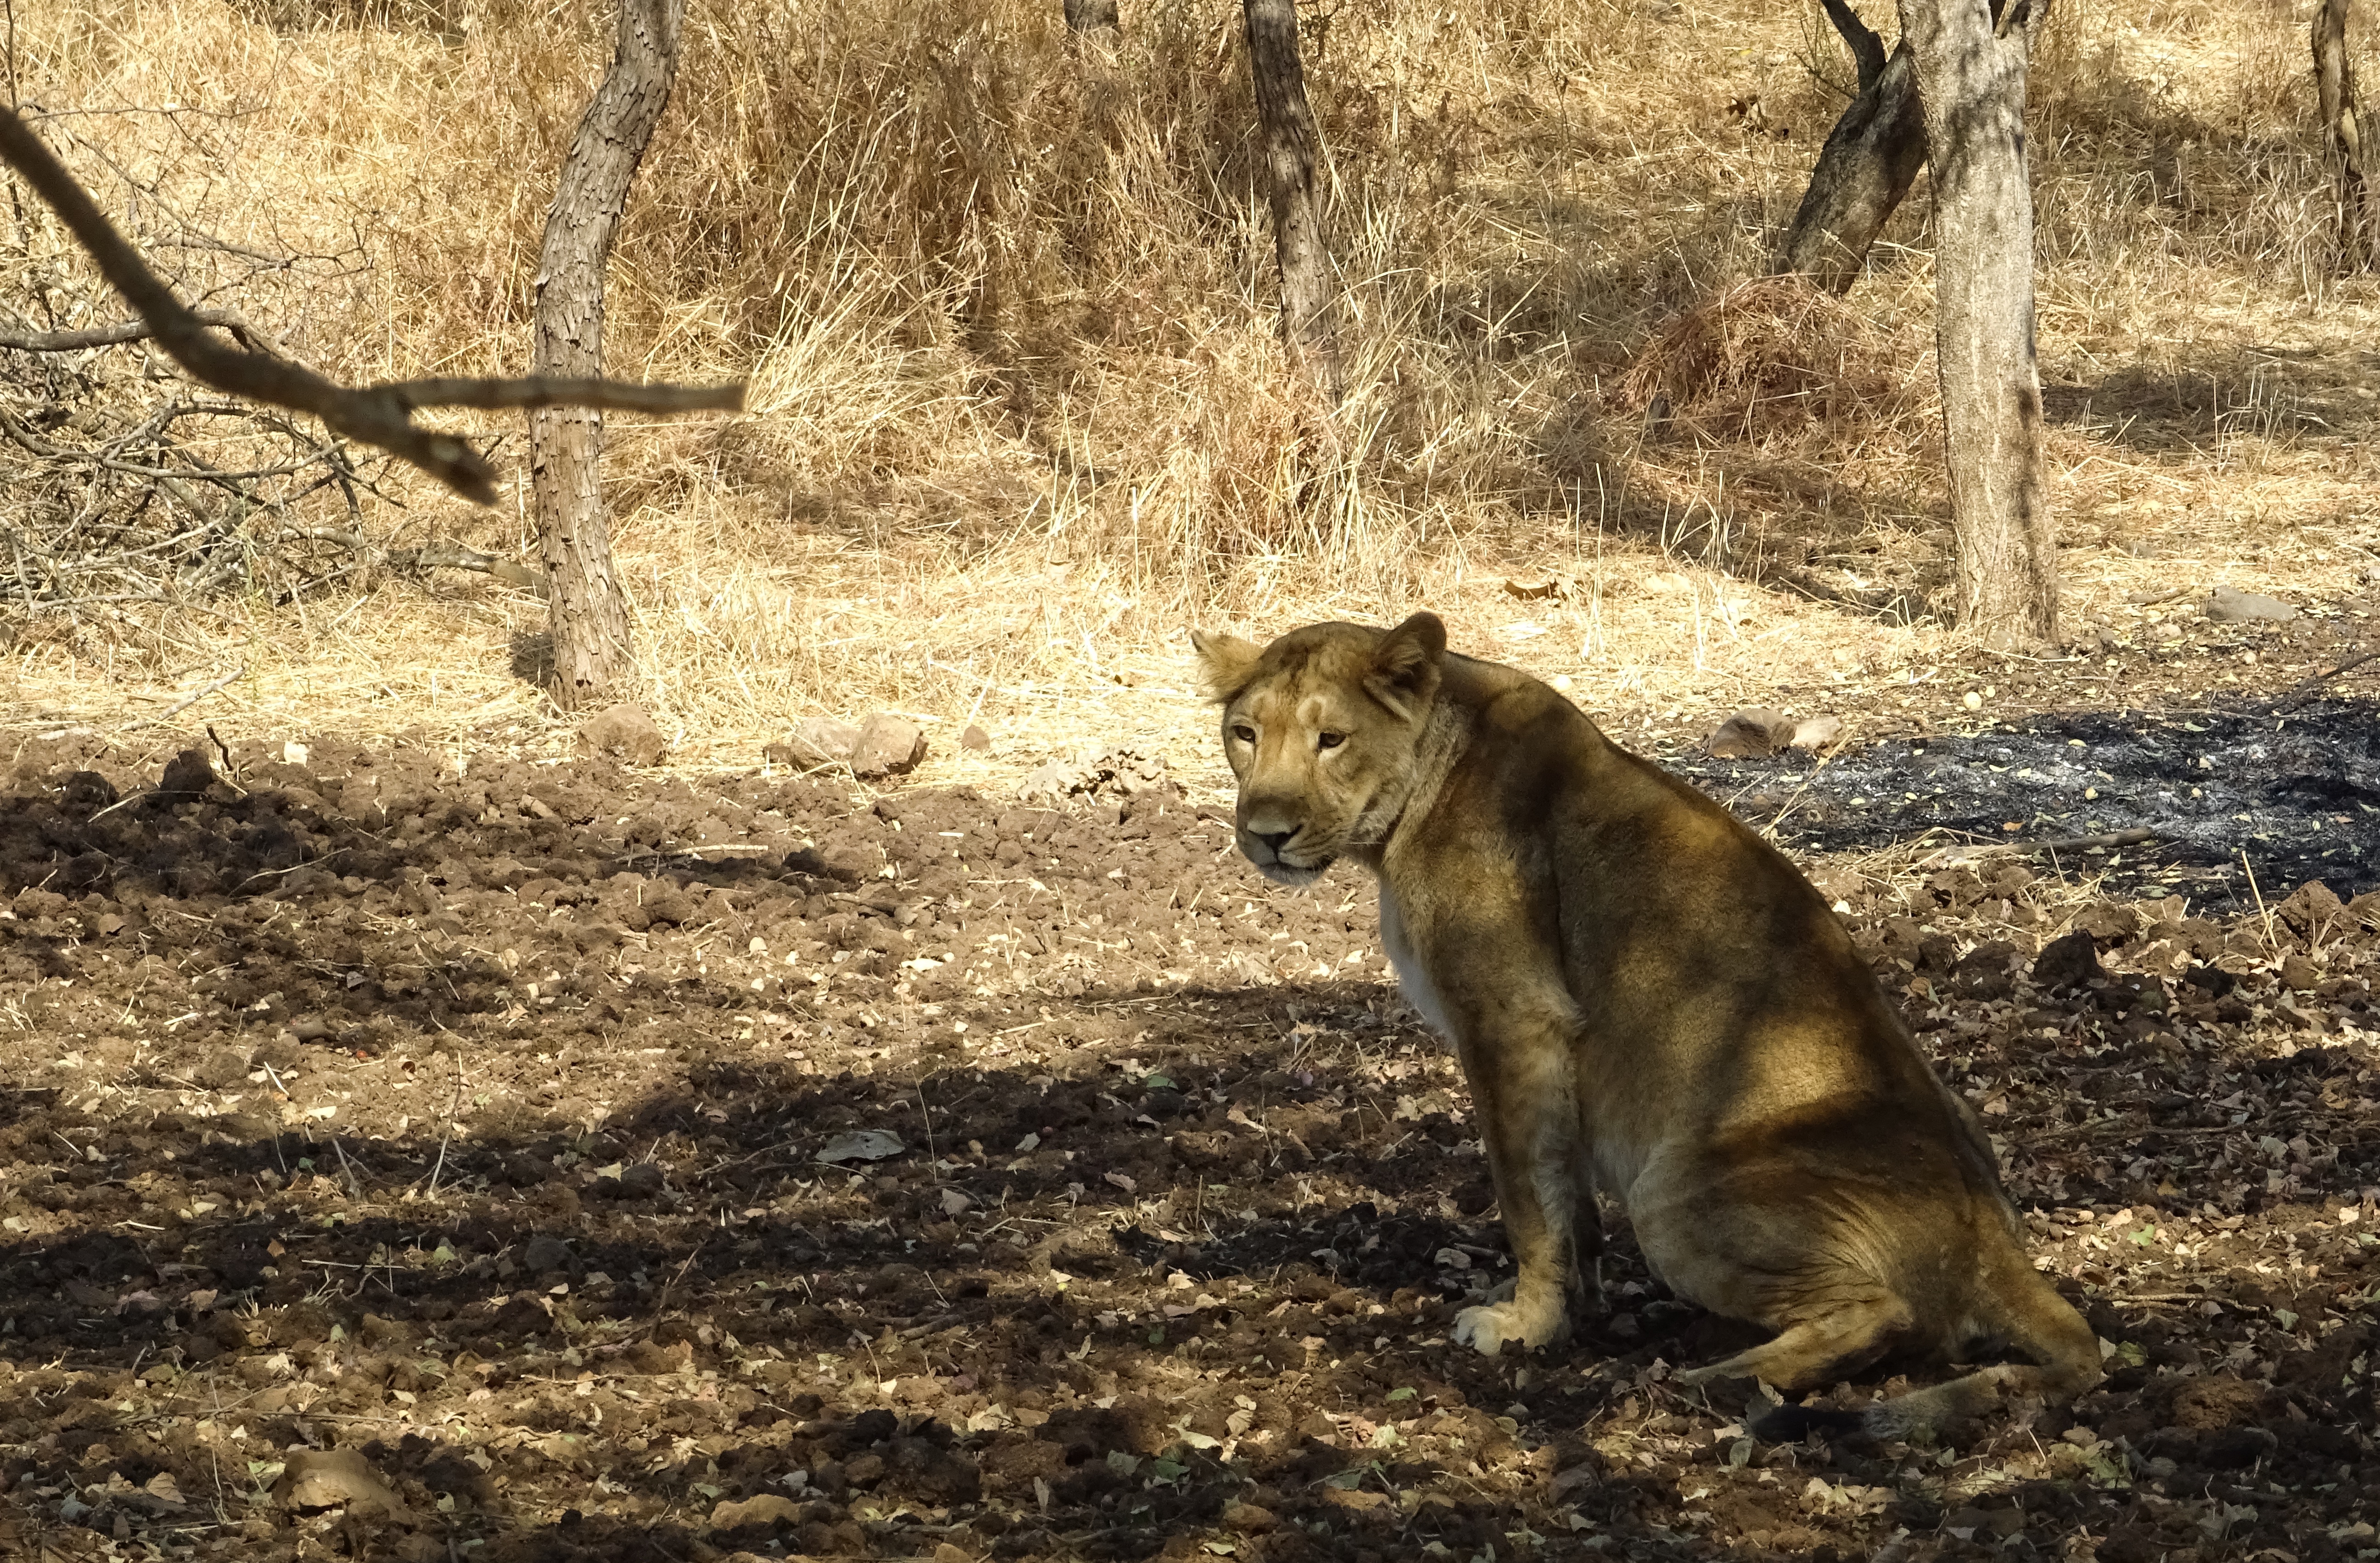 File:A lioness in Gir forest in Gujrat in india.jpg - Wikimedia Commons